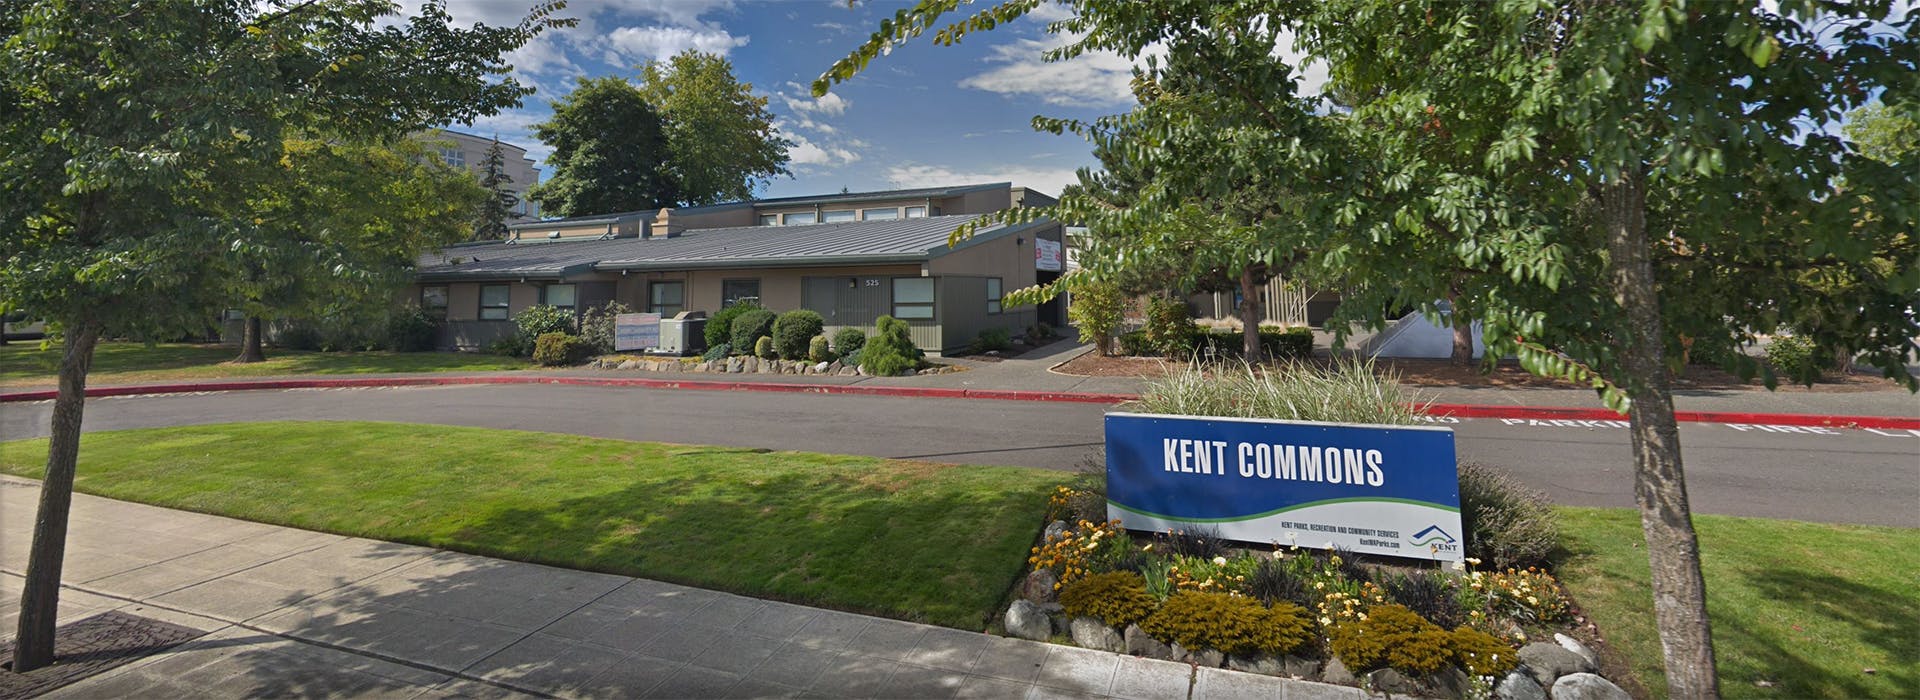 An image of the main entrance of Kent Commons Community Center